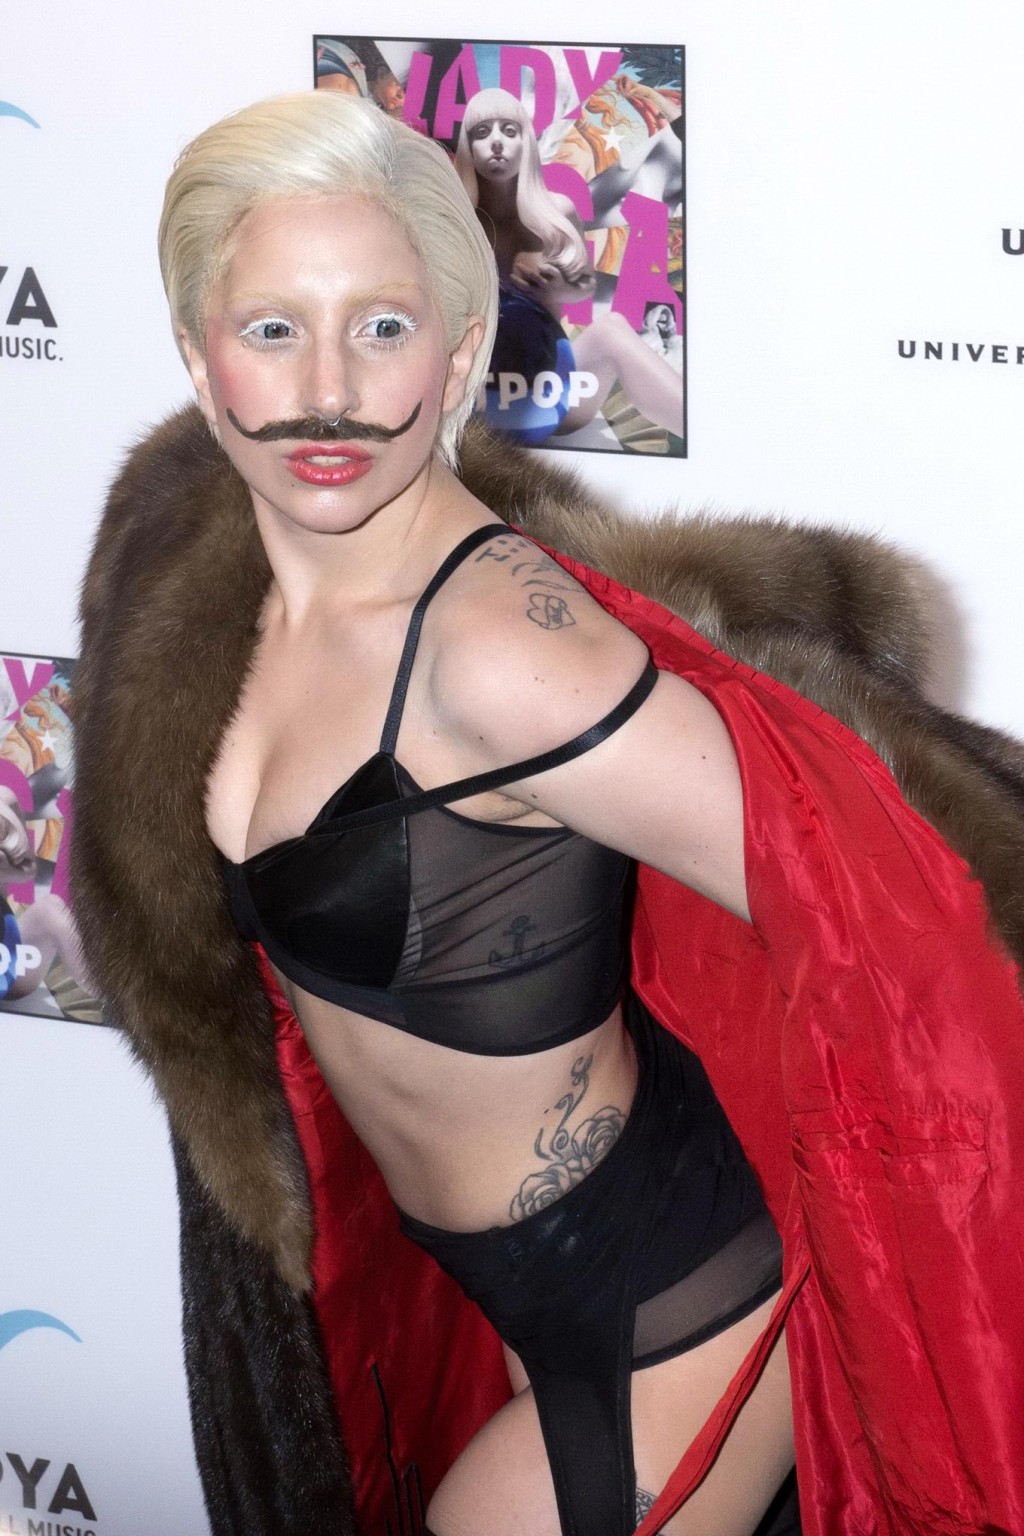 Lady Gaga wearing lingerie and fake moustache at her album promotion in Berlin #75215028